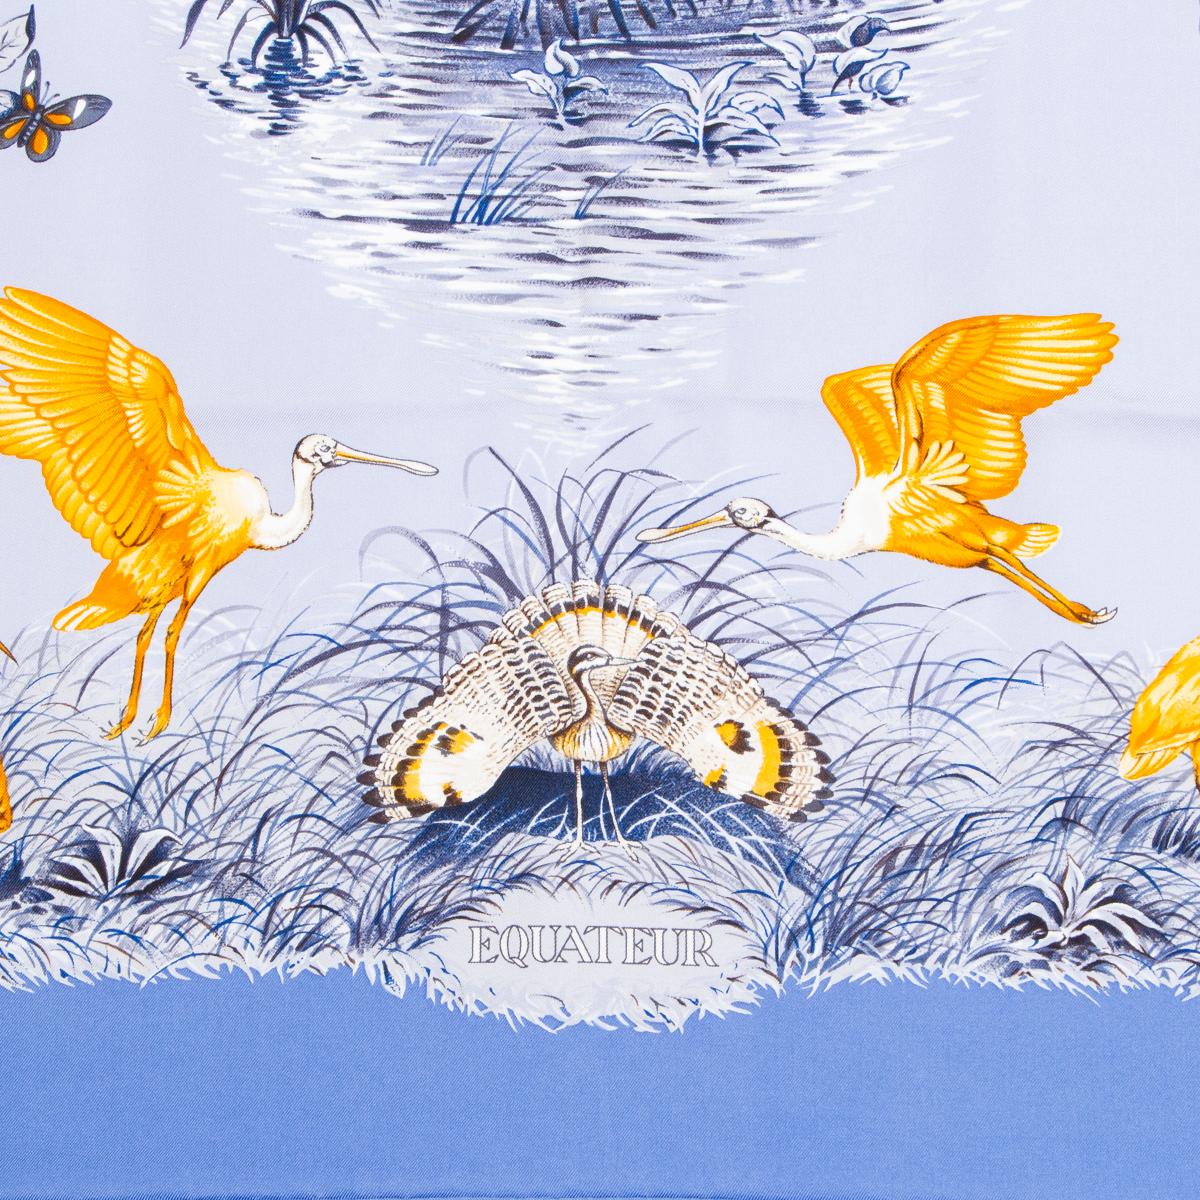 Hermes 'Equateur 90' scarf in light blue wash twill (100%) with details in beige, cognac and brown. Brand new with tag

Width 90cm (35.1in)
Height 90cm (35.1in)